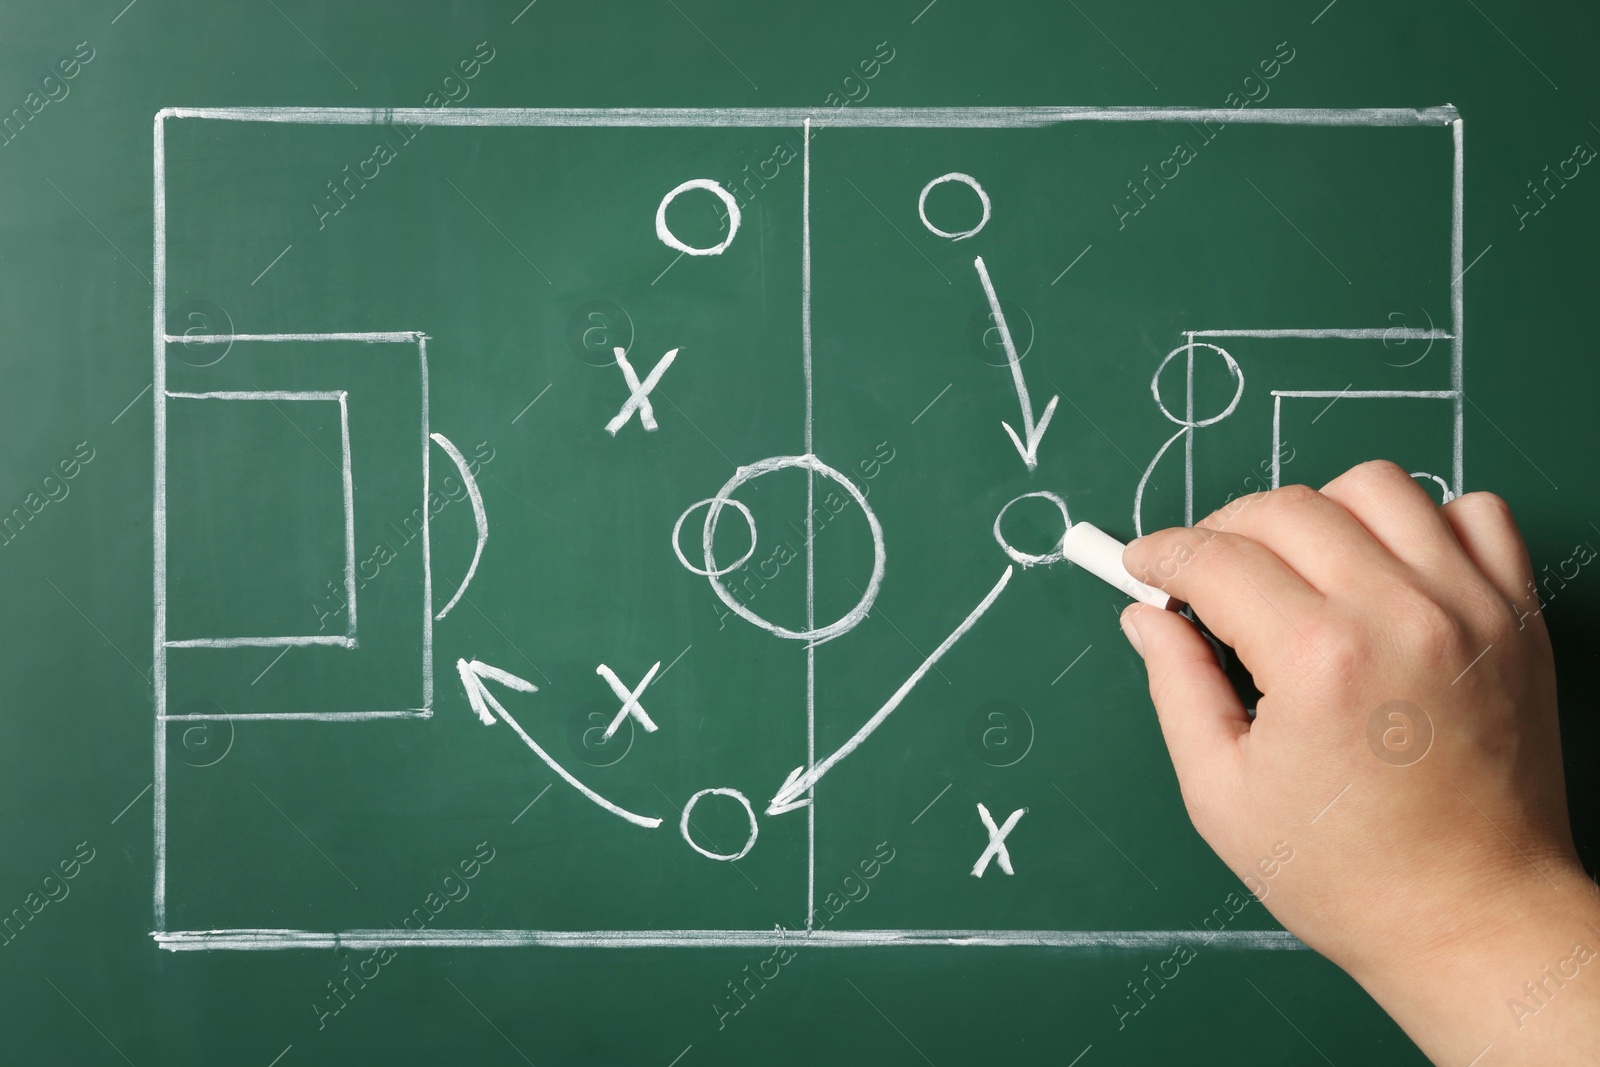 Photo of Woman drawing football game scheme on chalkboard, top view